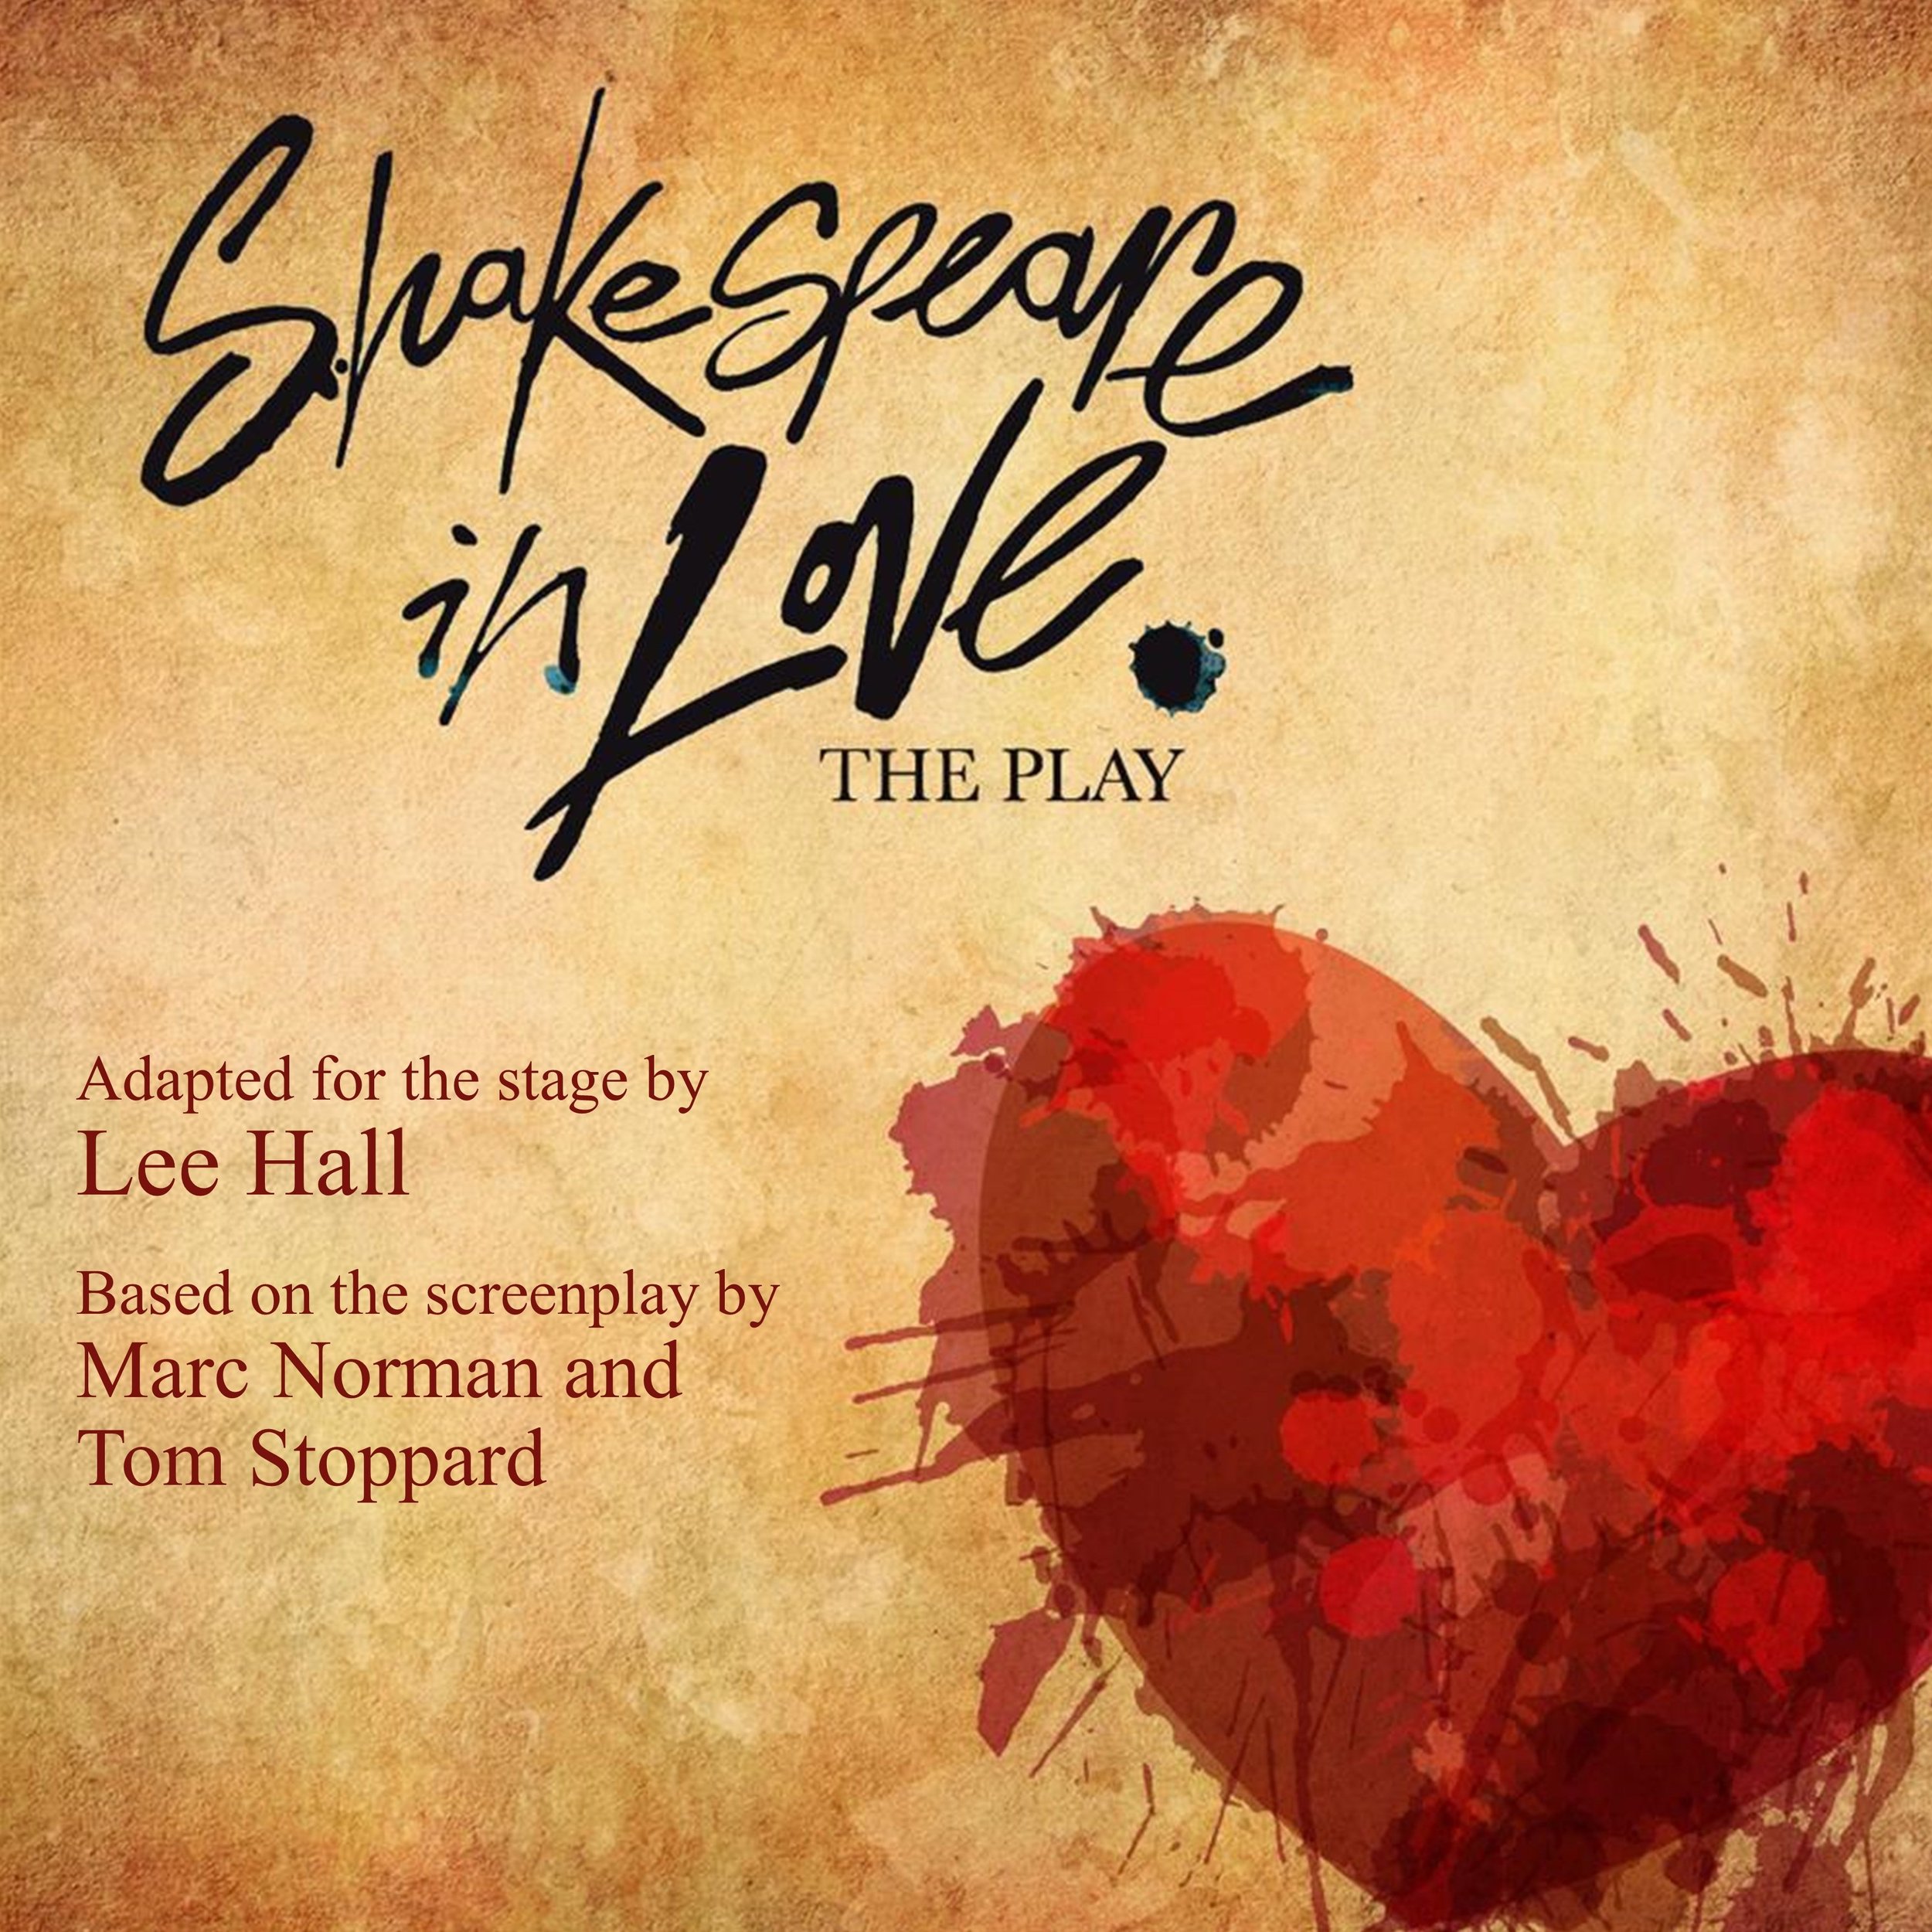 Shakespeare in Love  - Audition Date 23rd April 2023, 11am